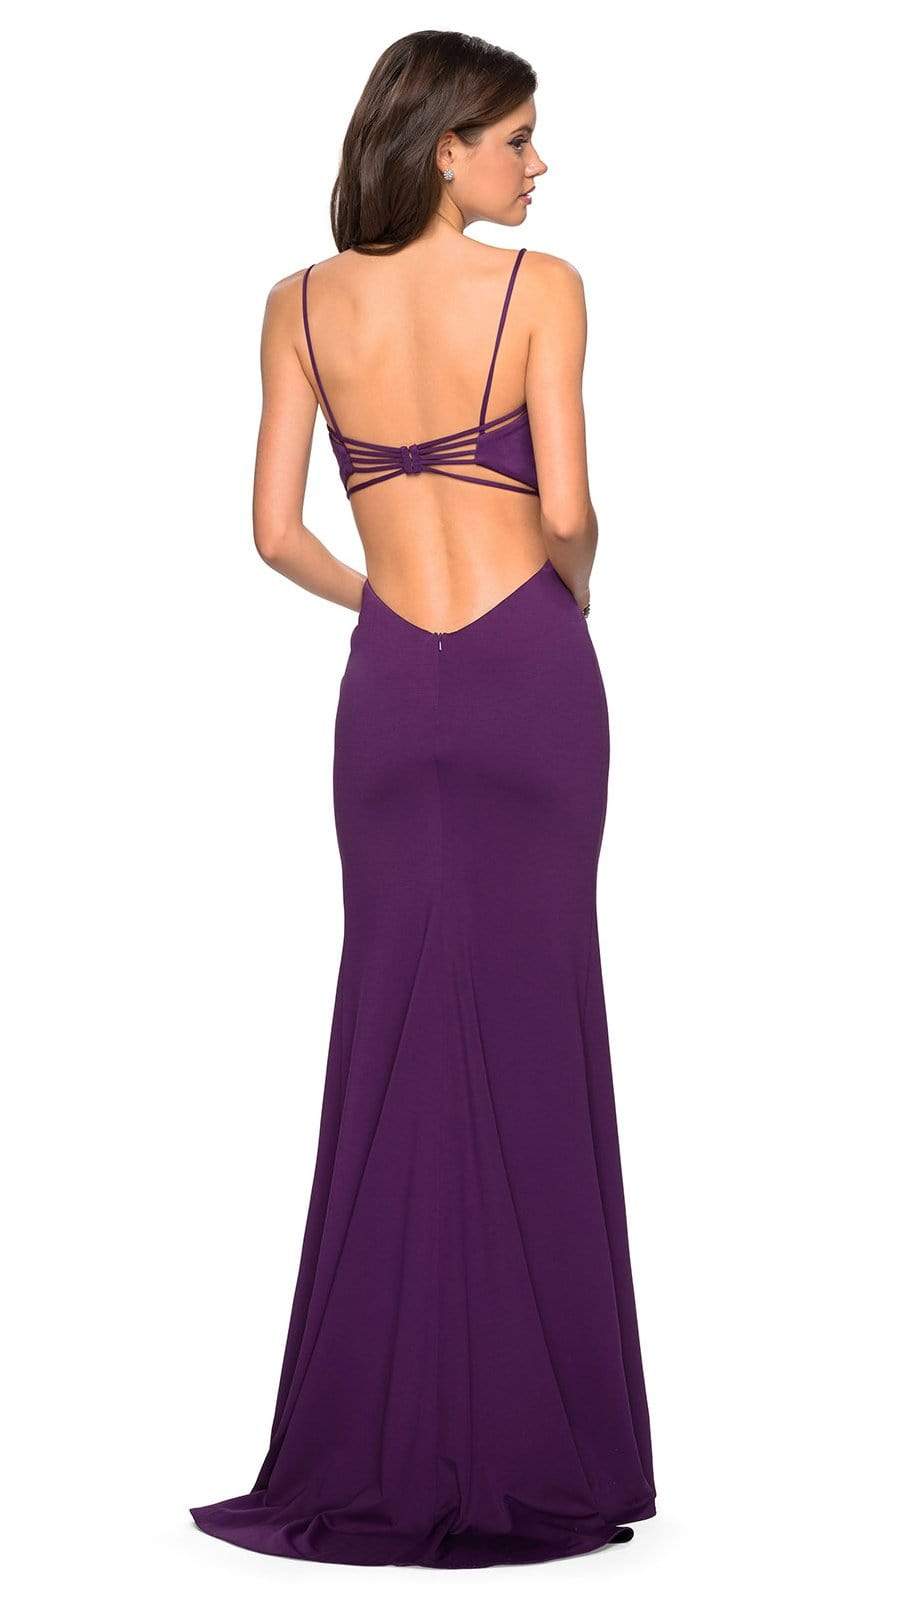 La Femme - V-Neck Strappy Open Back Evening Dress 27516SC -  1 pc Royal Blue in Size 00 and 1 pc Plum in Size 10 Available CCSALE 10 / Plum